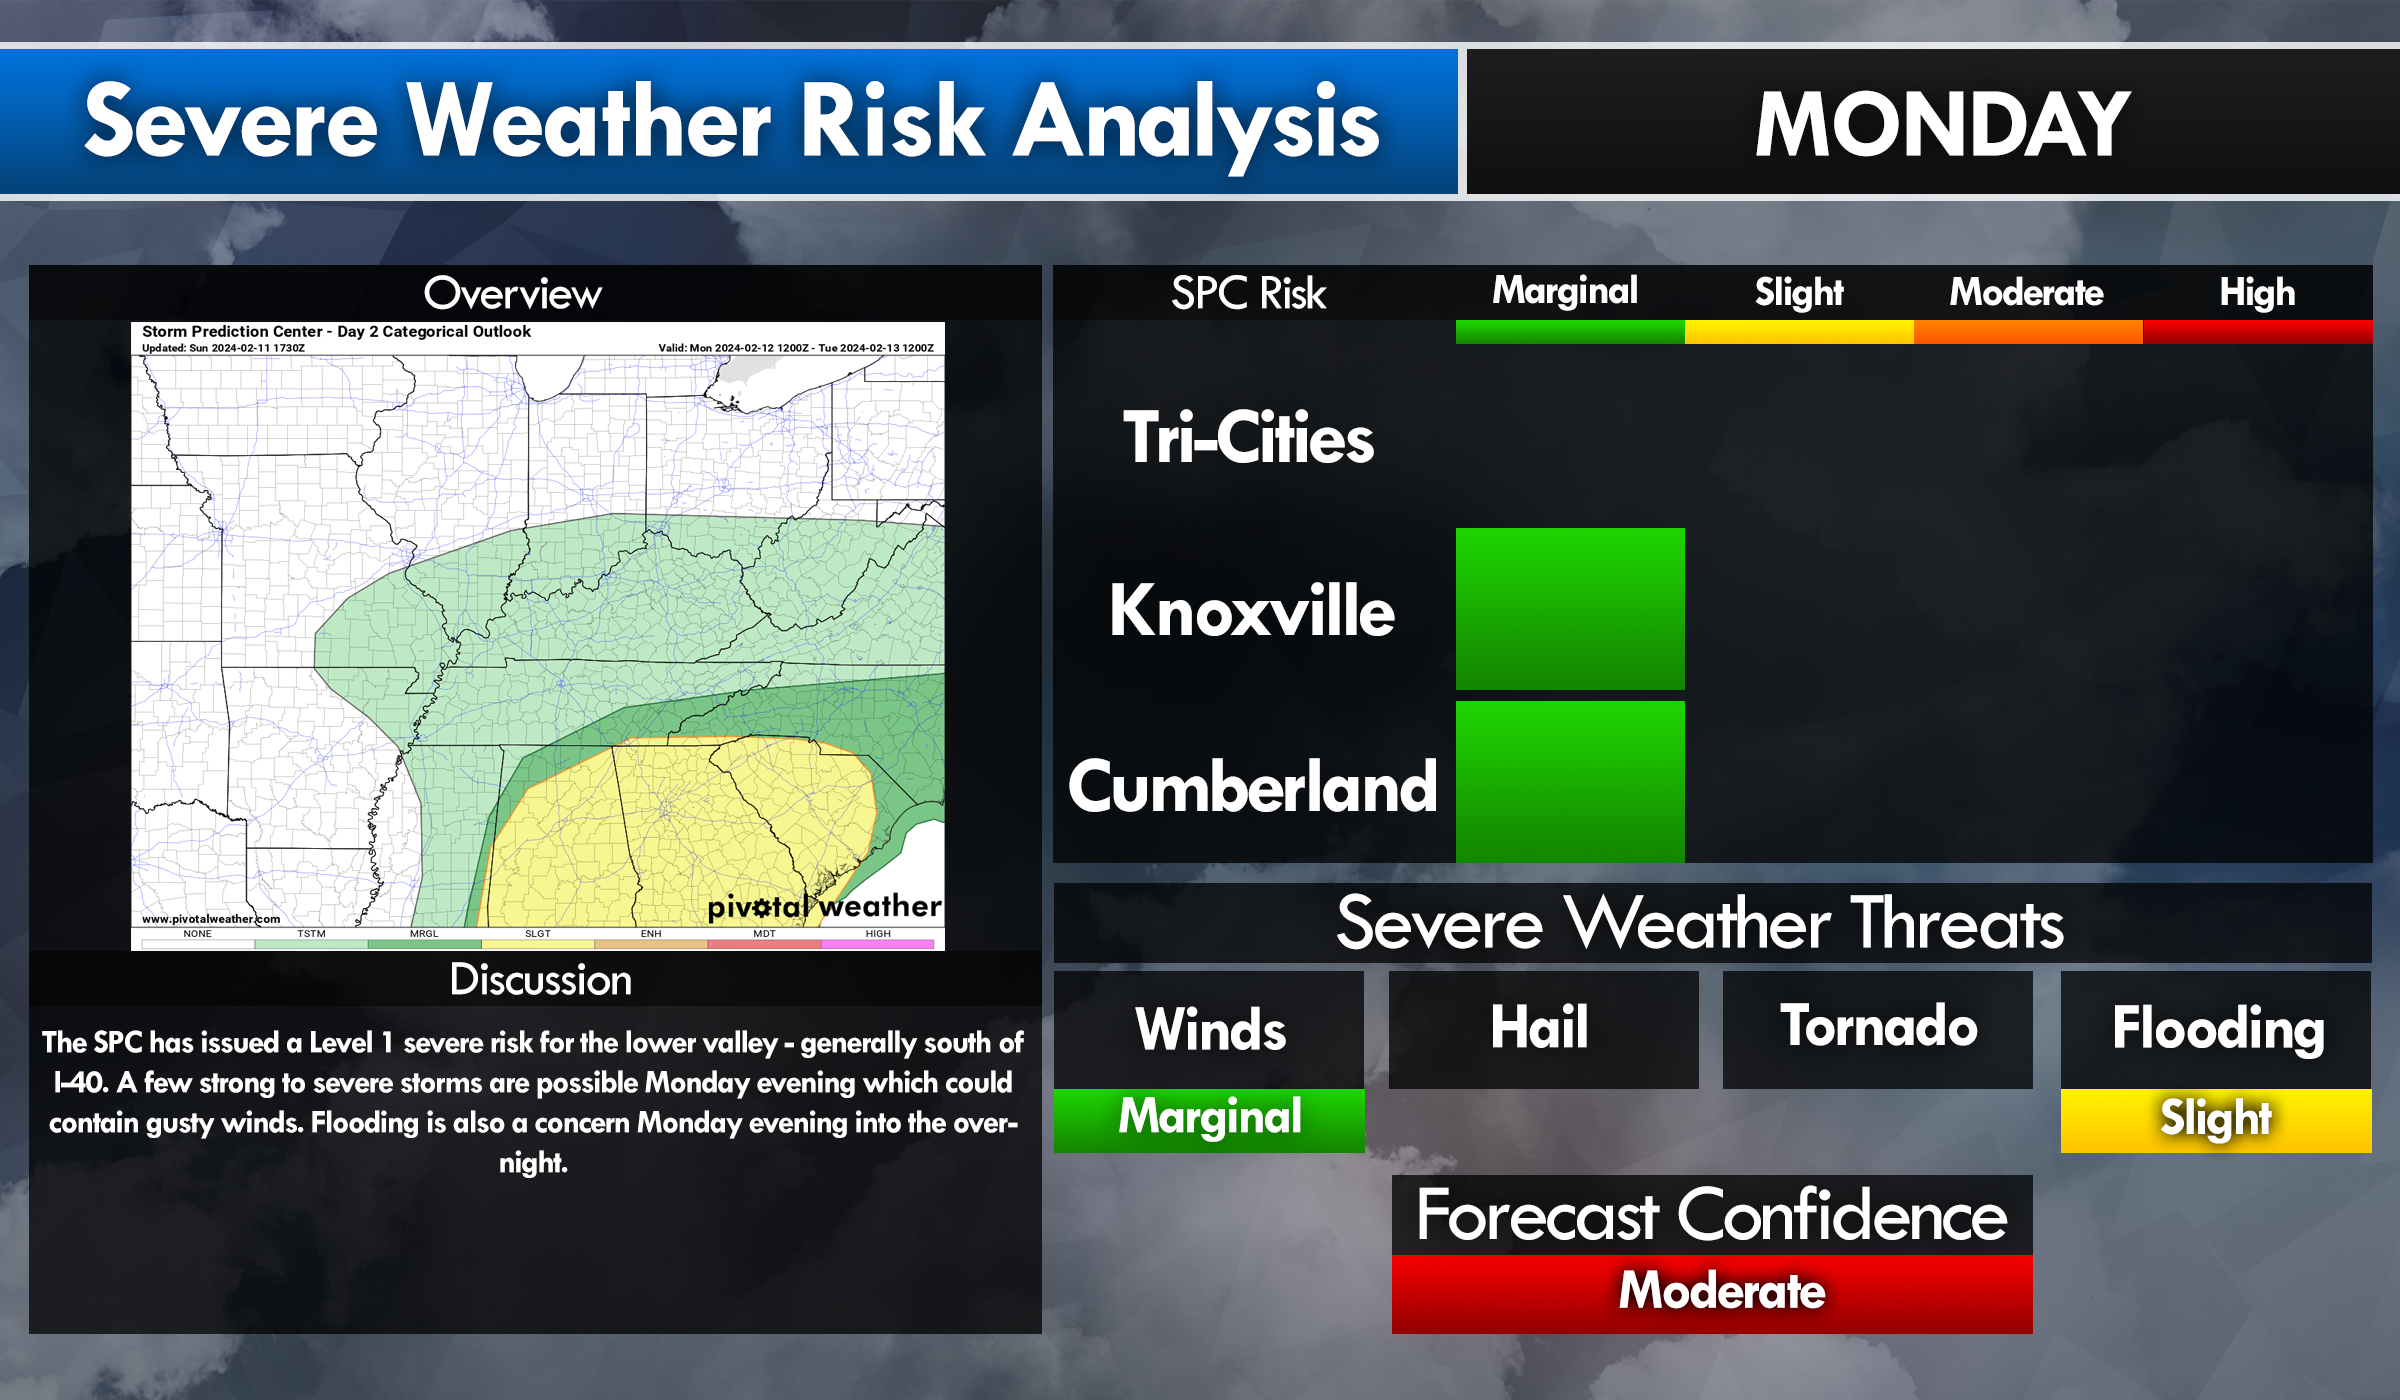 Severe Risk for the Lower Valley Monday